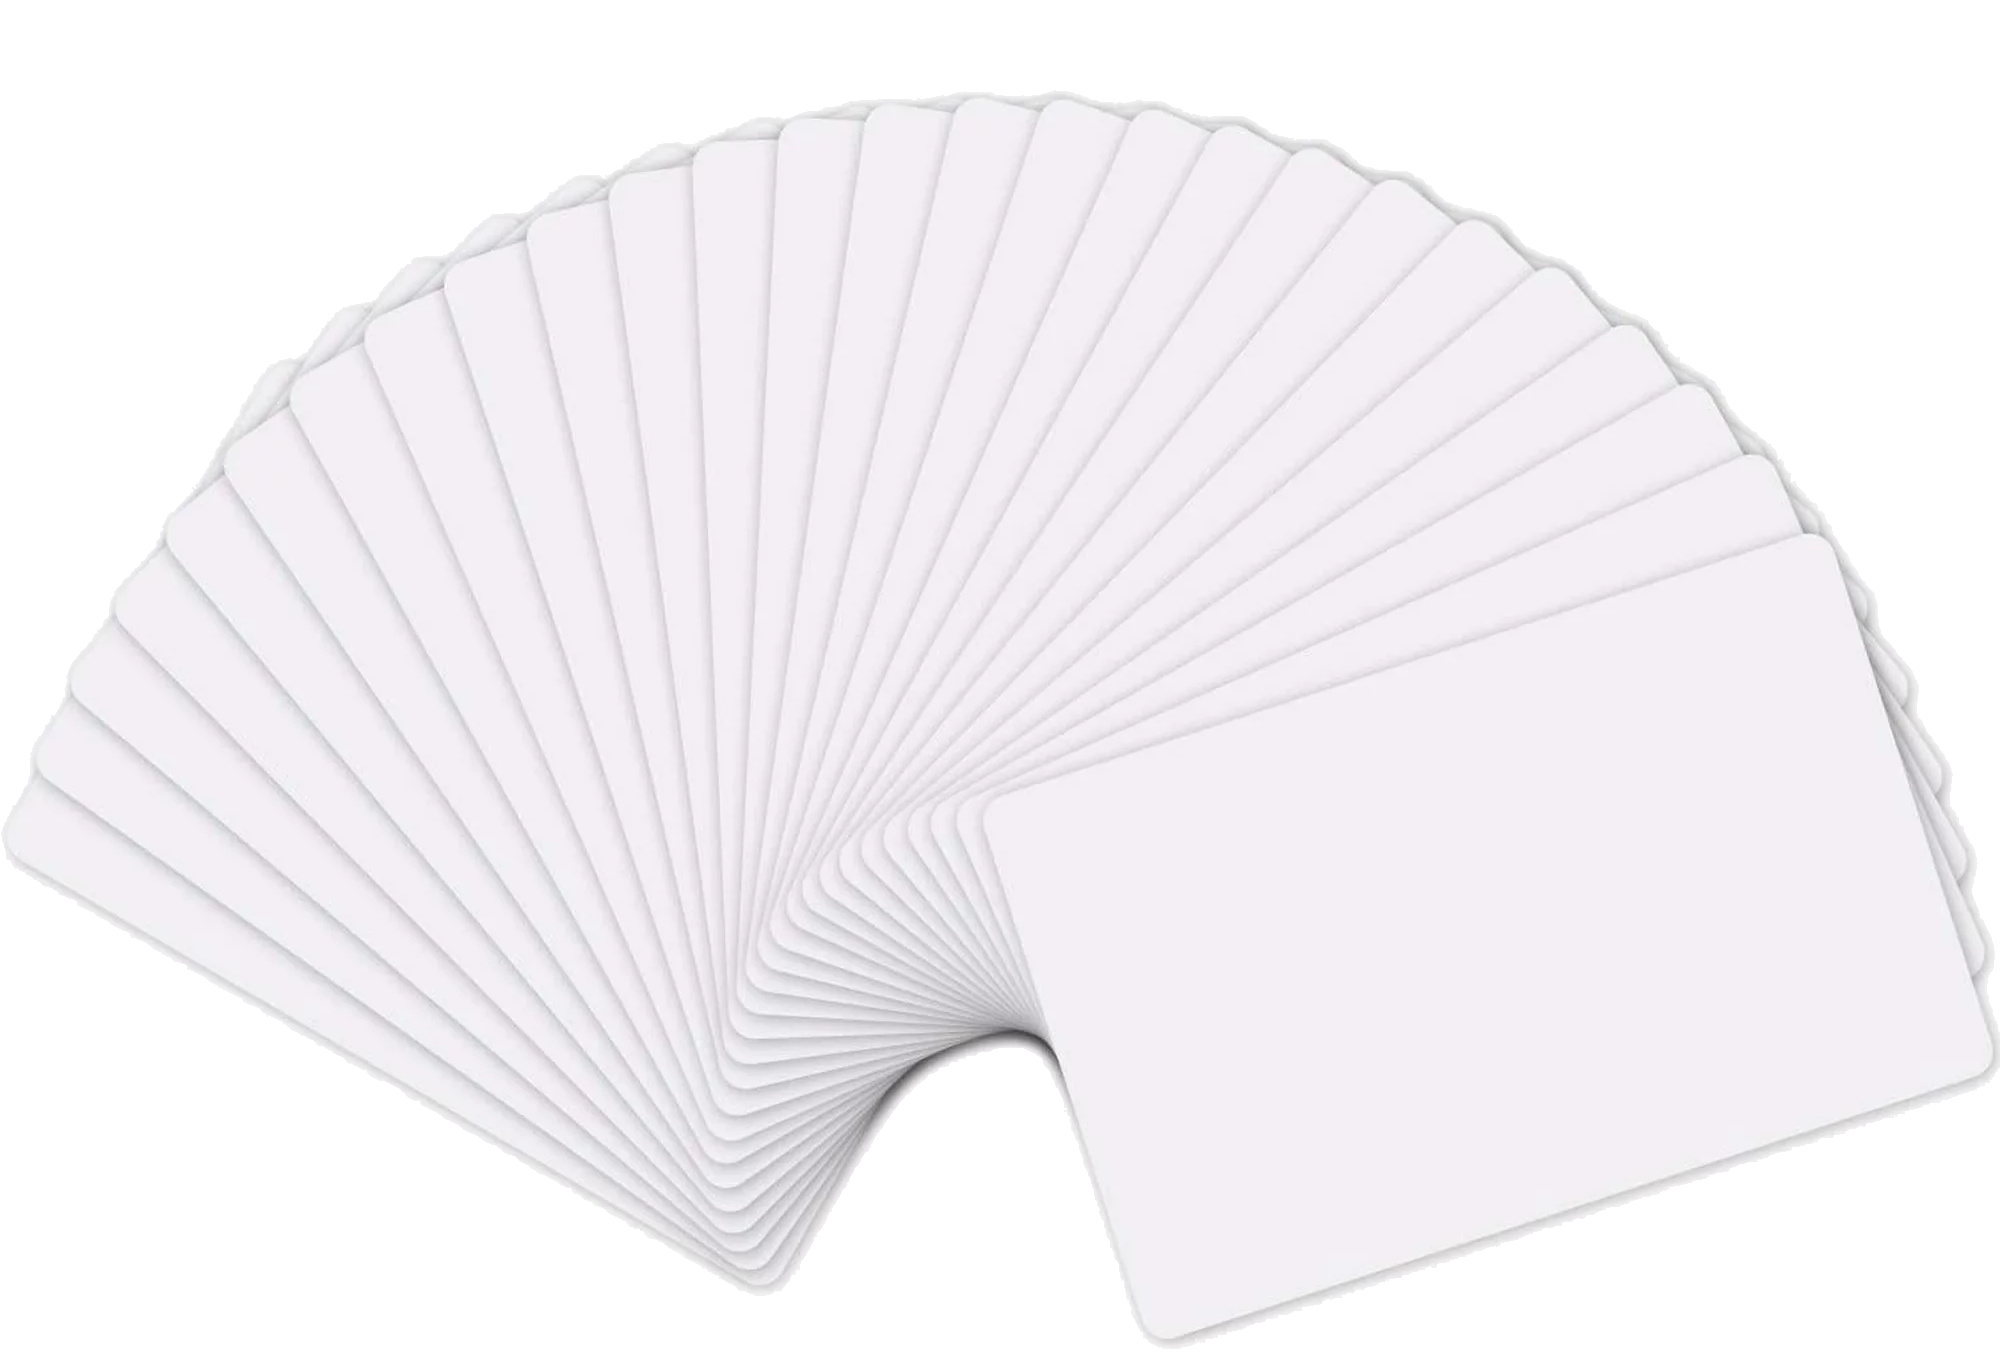 Blank white NFC review cards in a fan